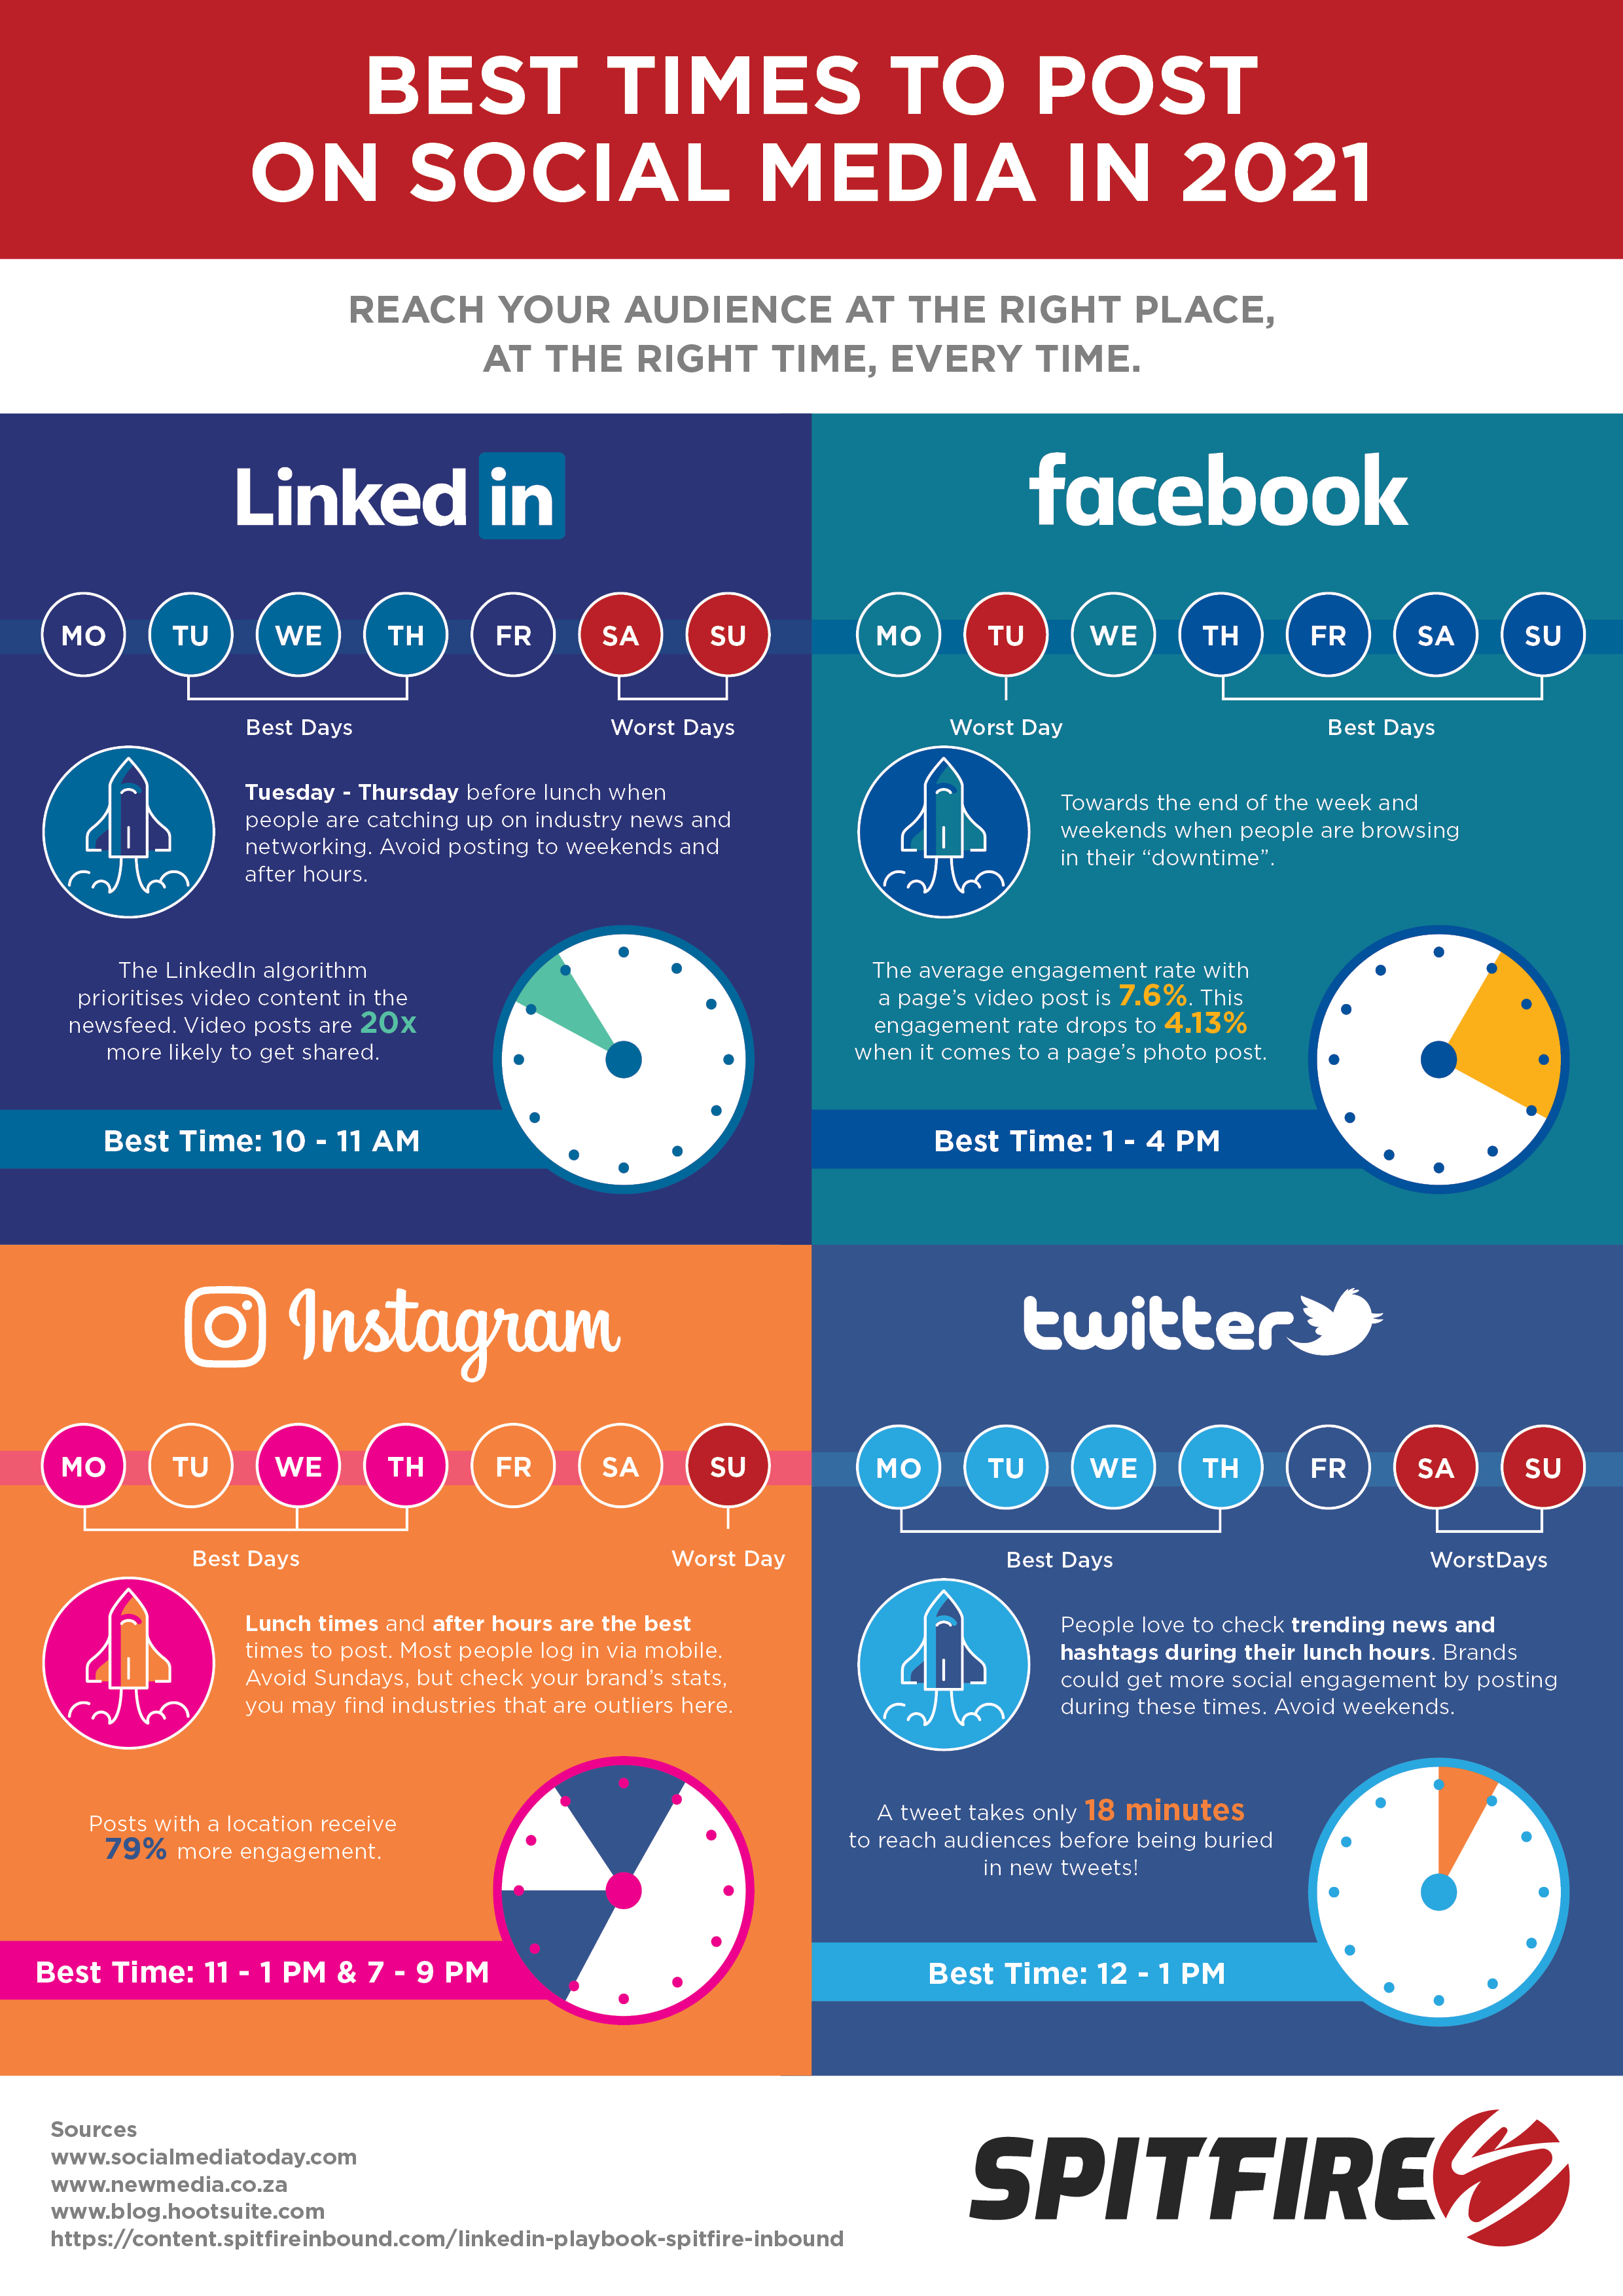 [INFOGRAPHIC] Best times to post to social media in 2021